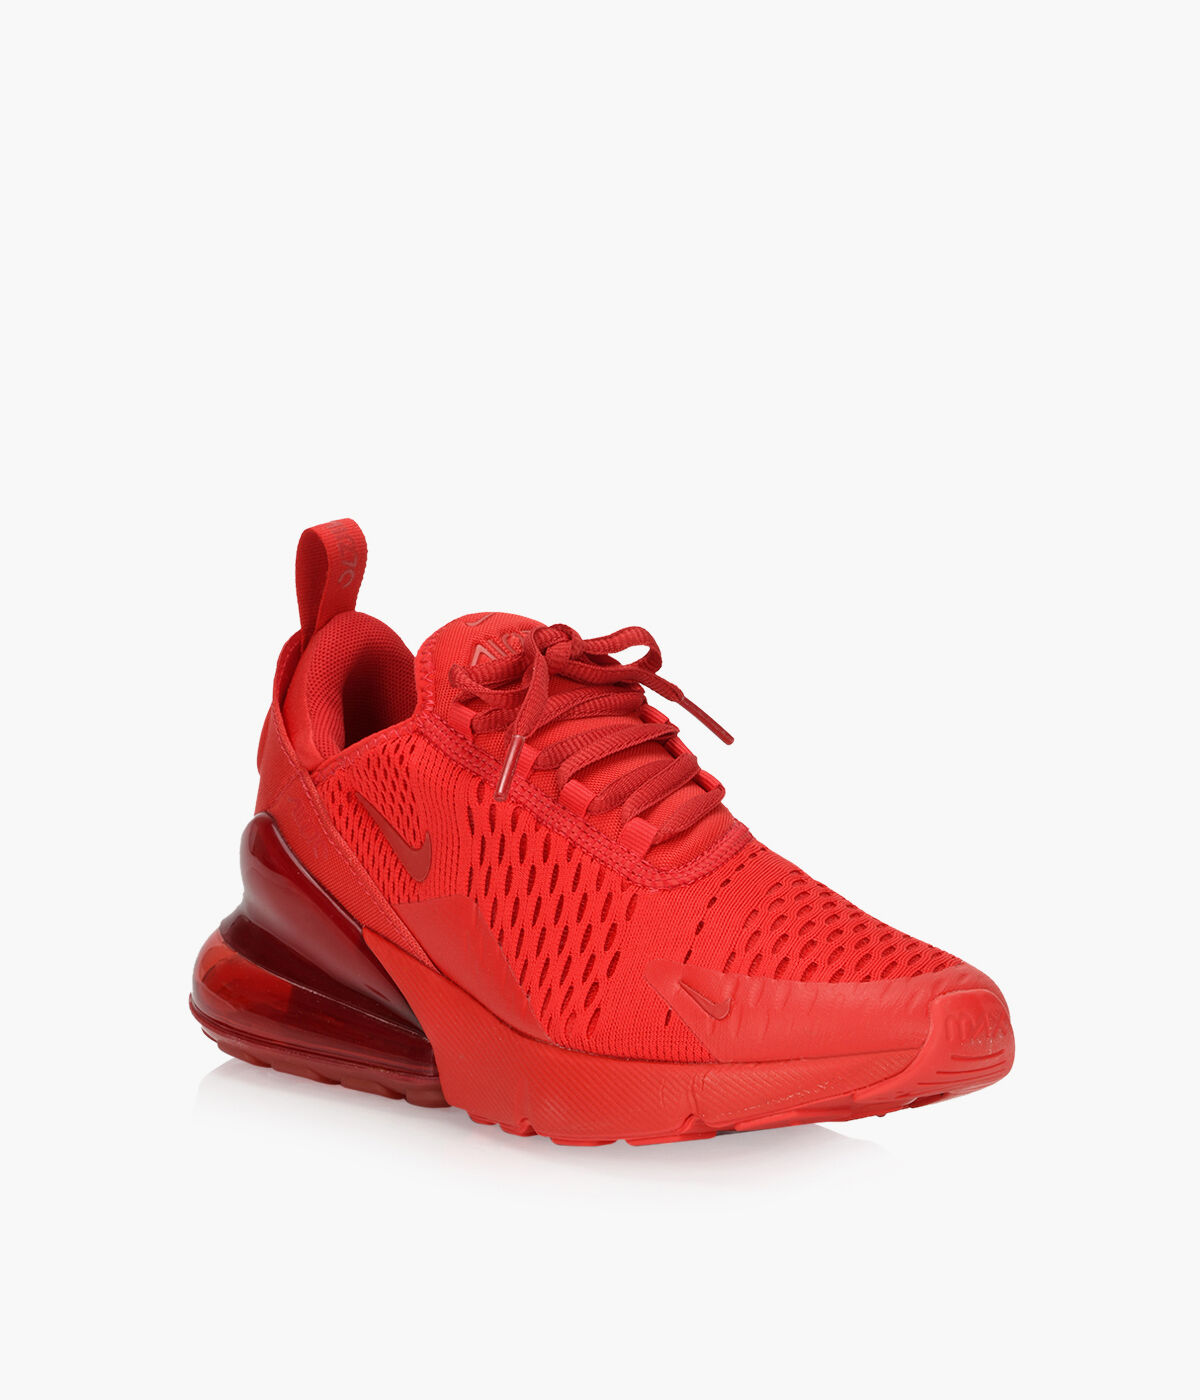 airmax 270 rouge